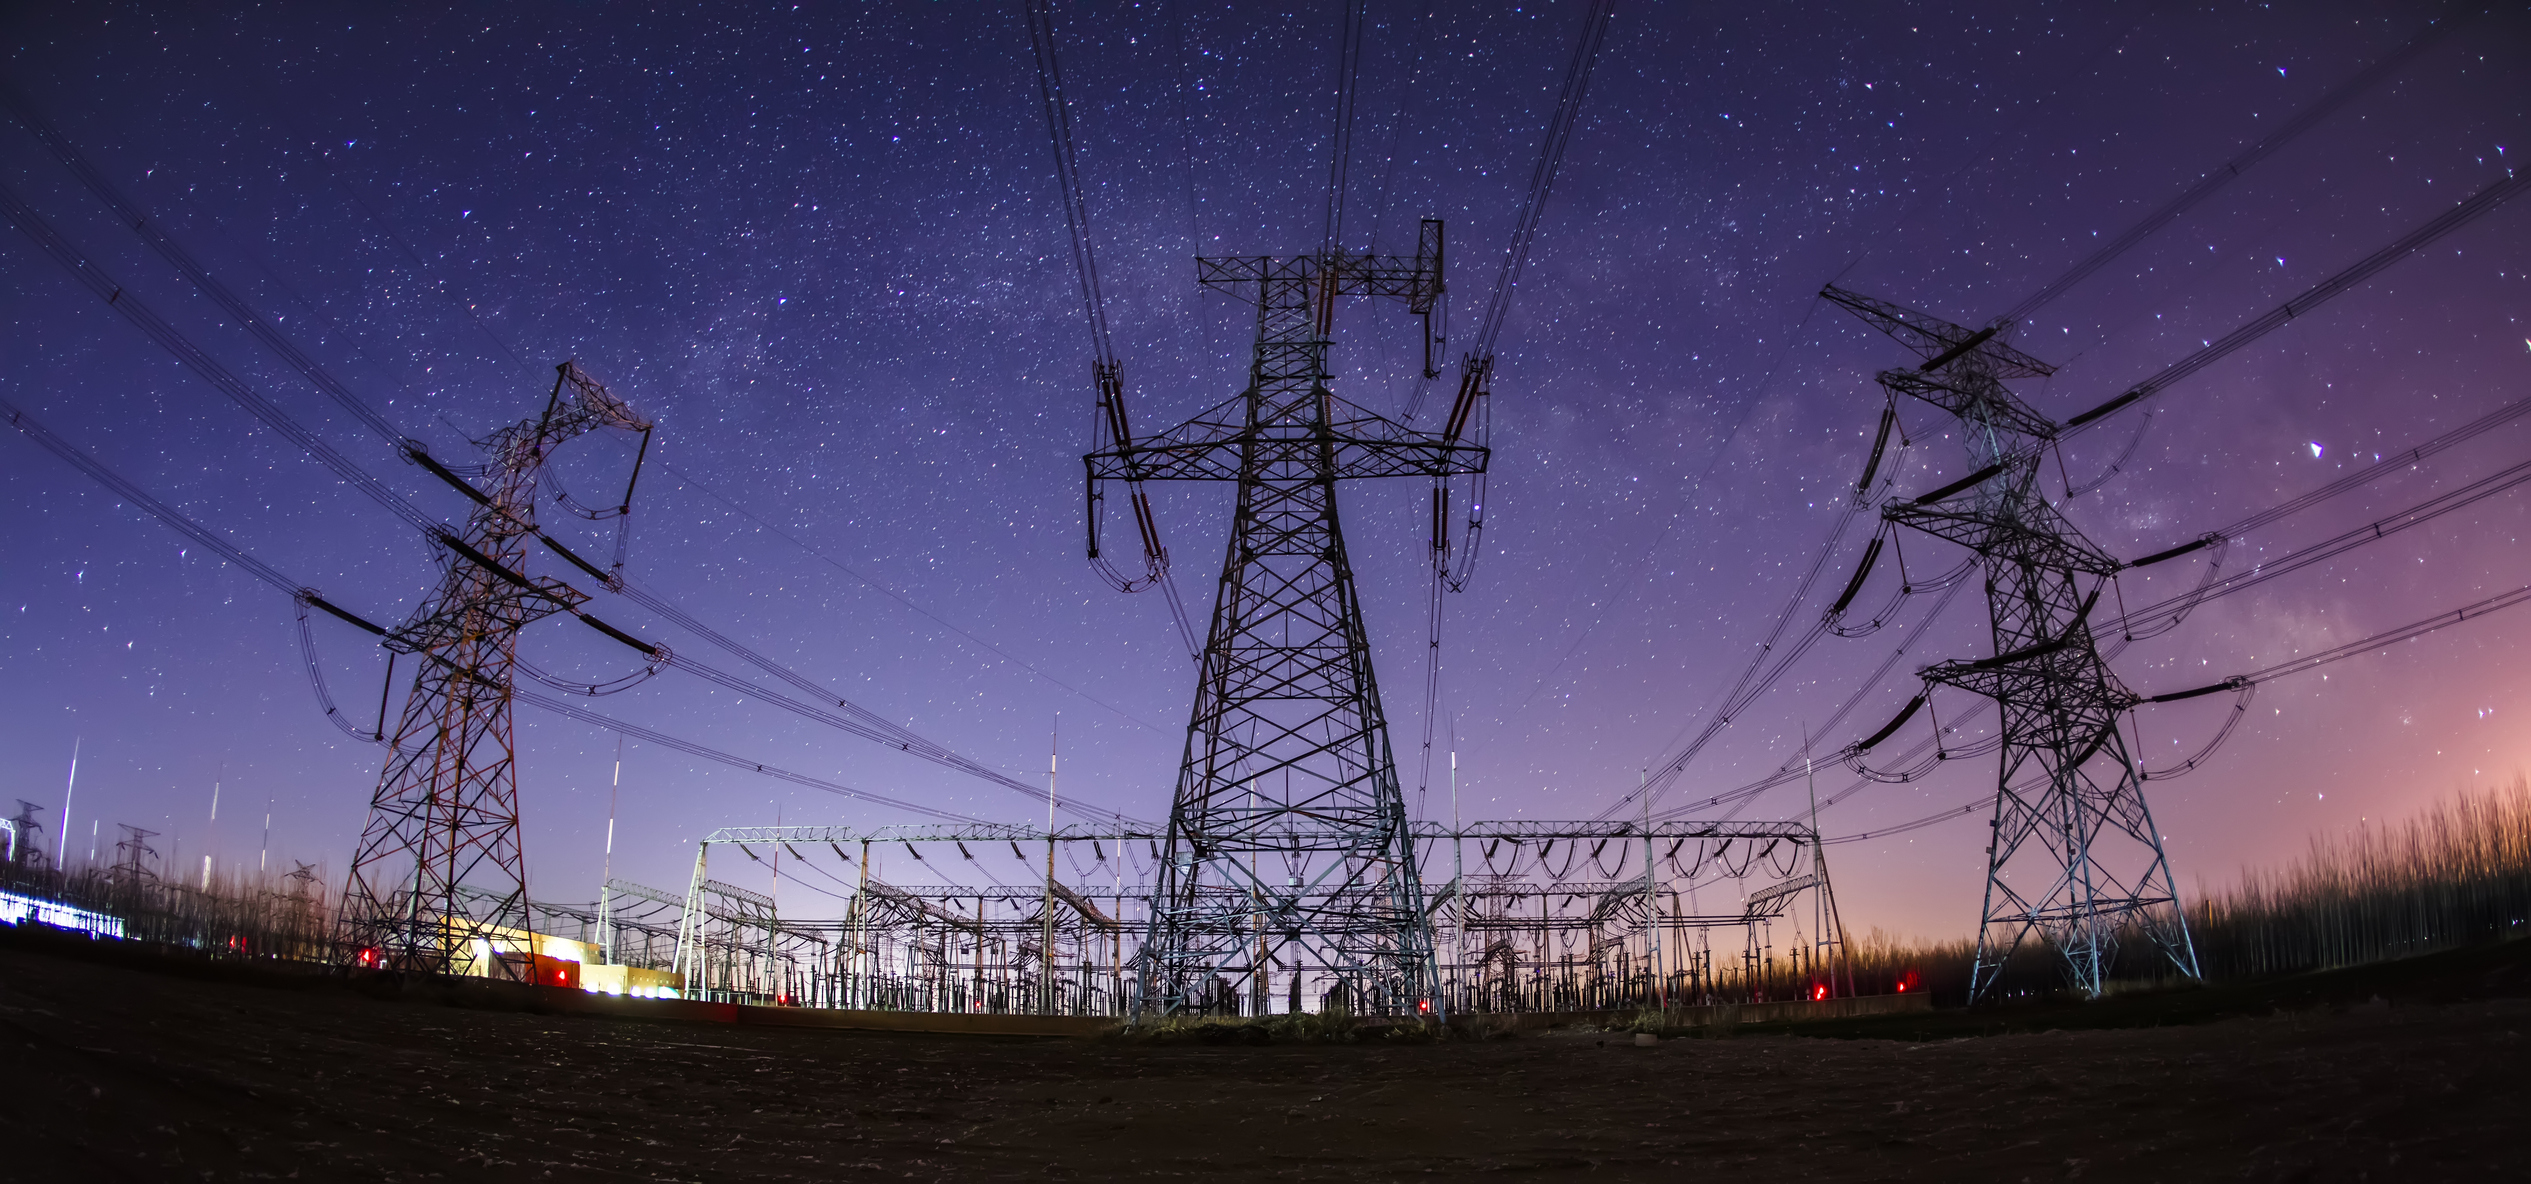 High voltage towers at night and the Milky Way